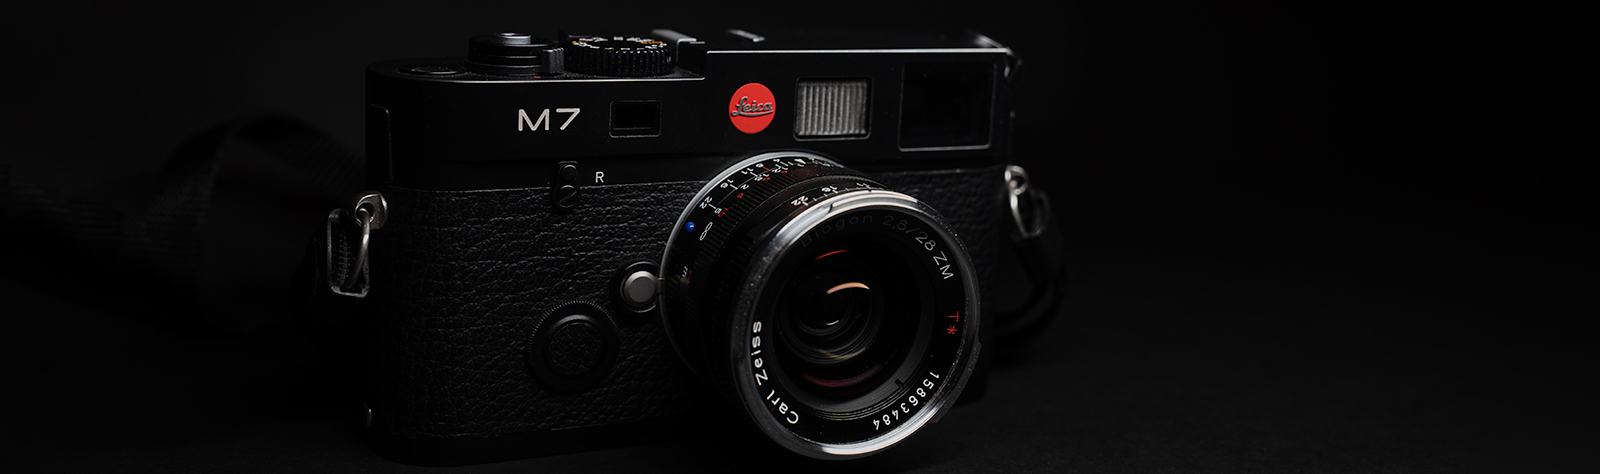 A guide to 28mm Leica m-mount lenses for normal people